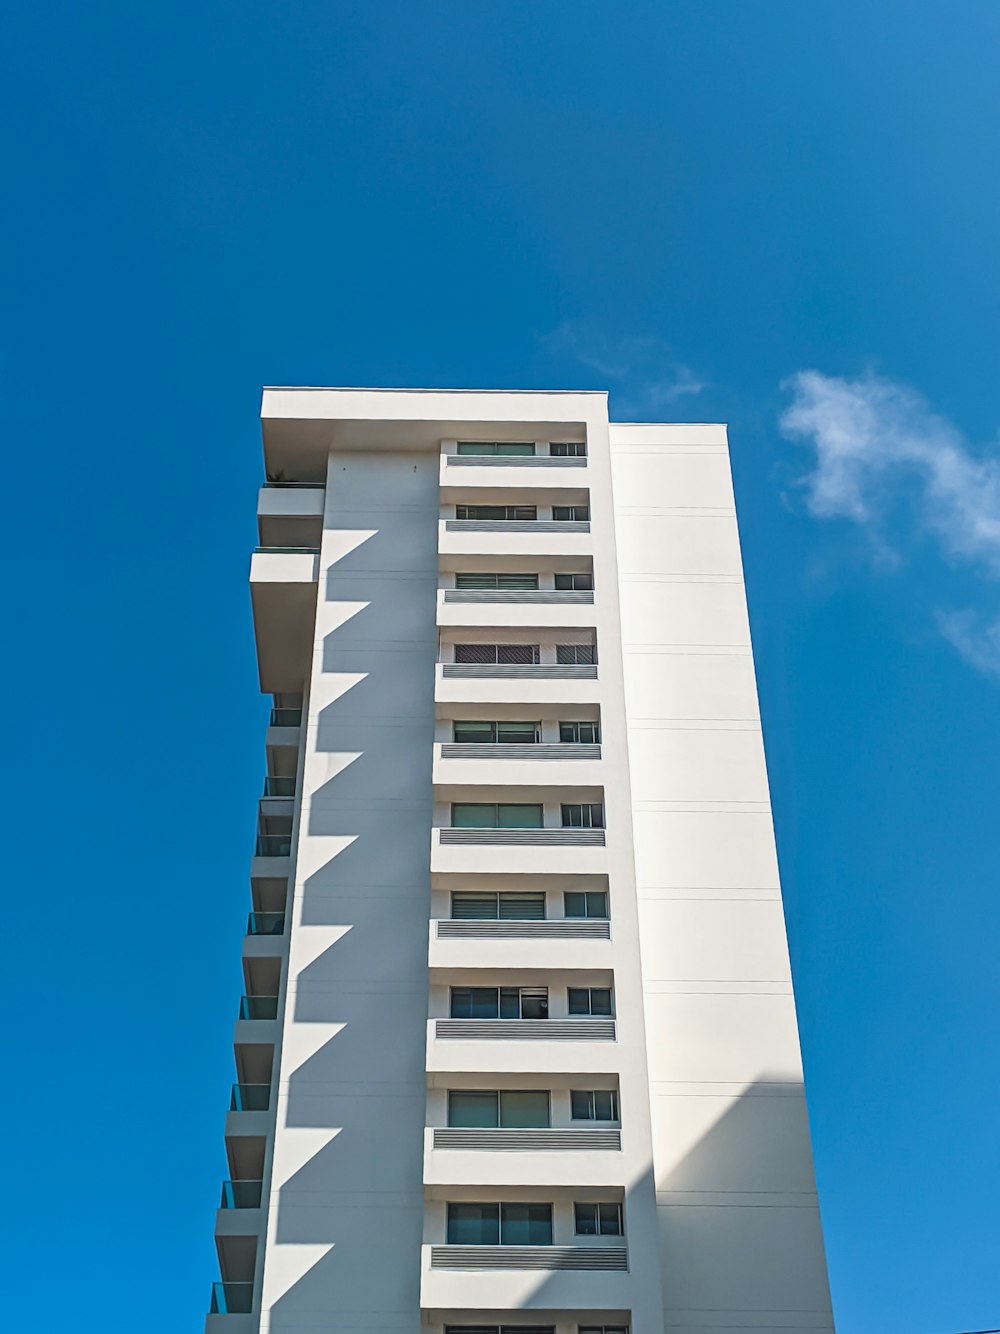 a tall white building with balconies against a blue sky